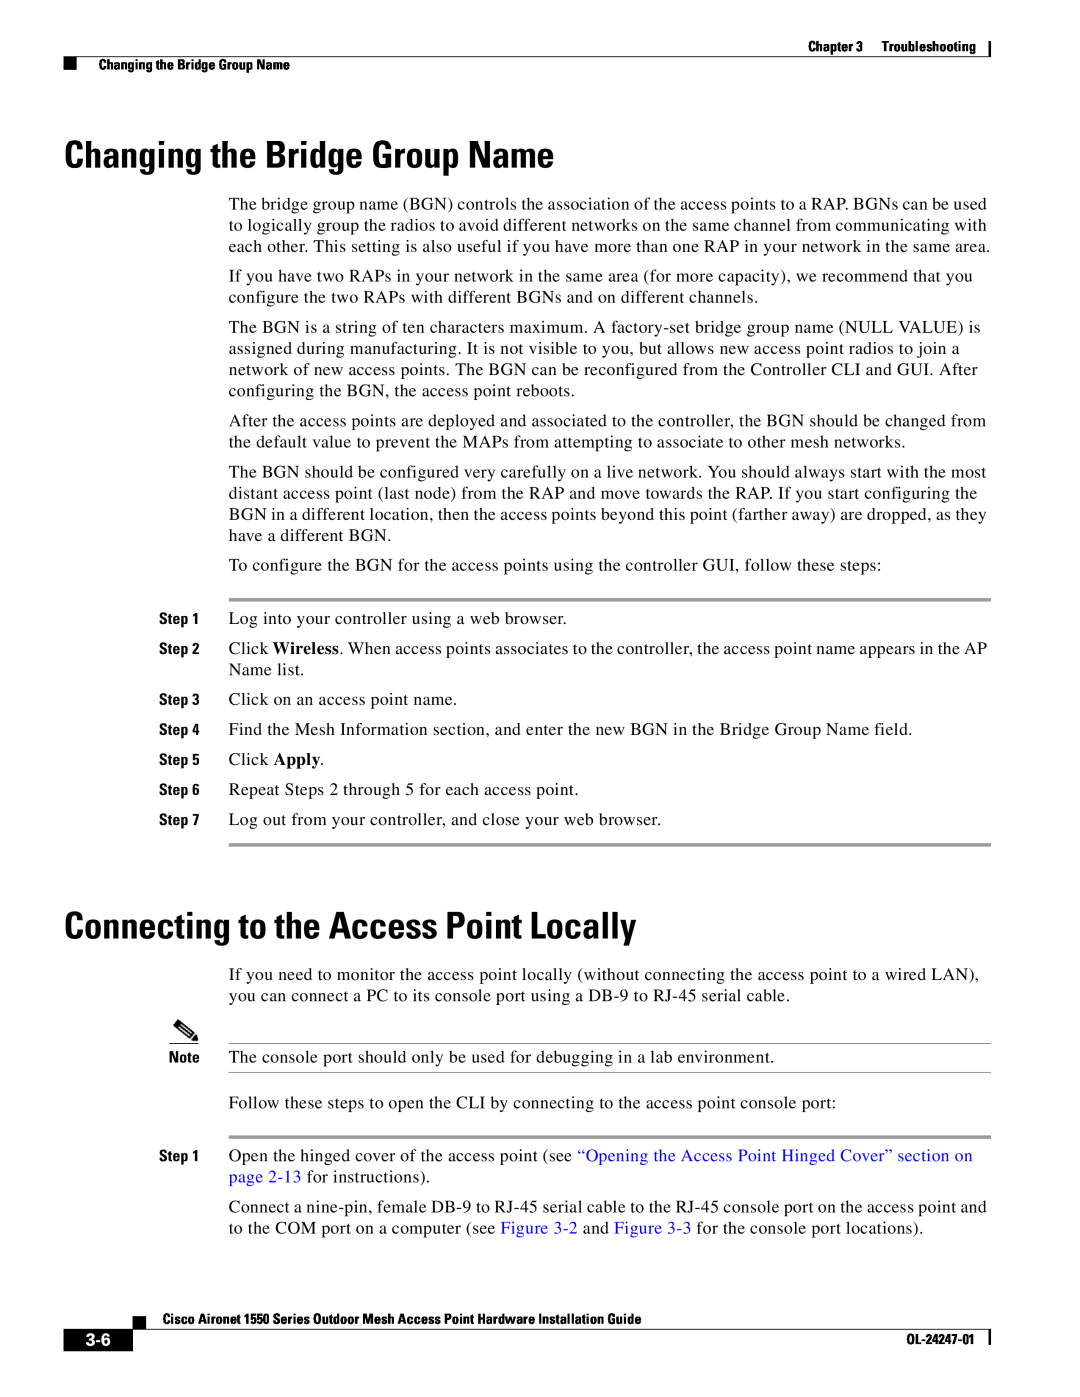 Cisco Systems AIRPWRINJ15002, AIRCAP1552EAK9RF manual Changing the Bridge Group Name, Connecting to the Access Point Locally 